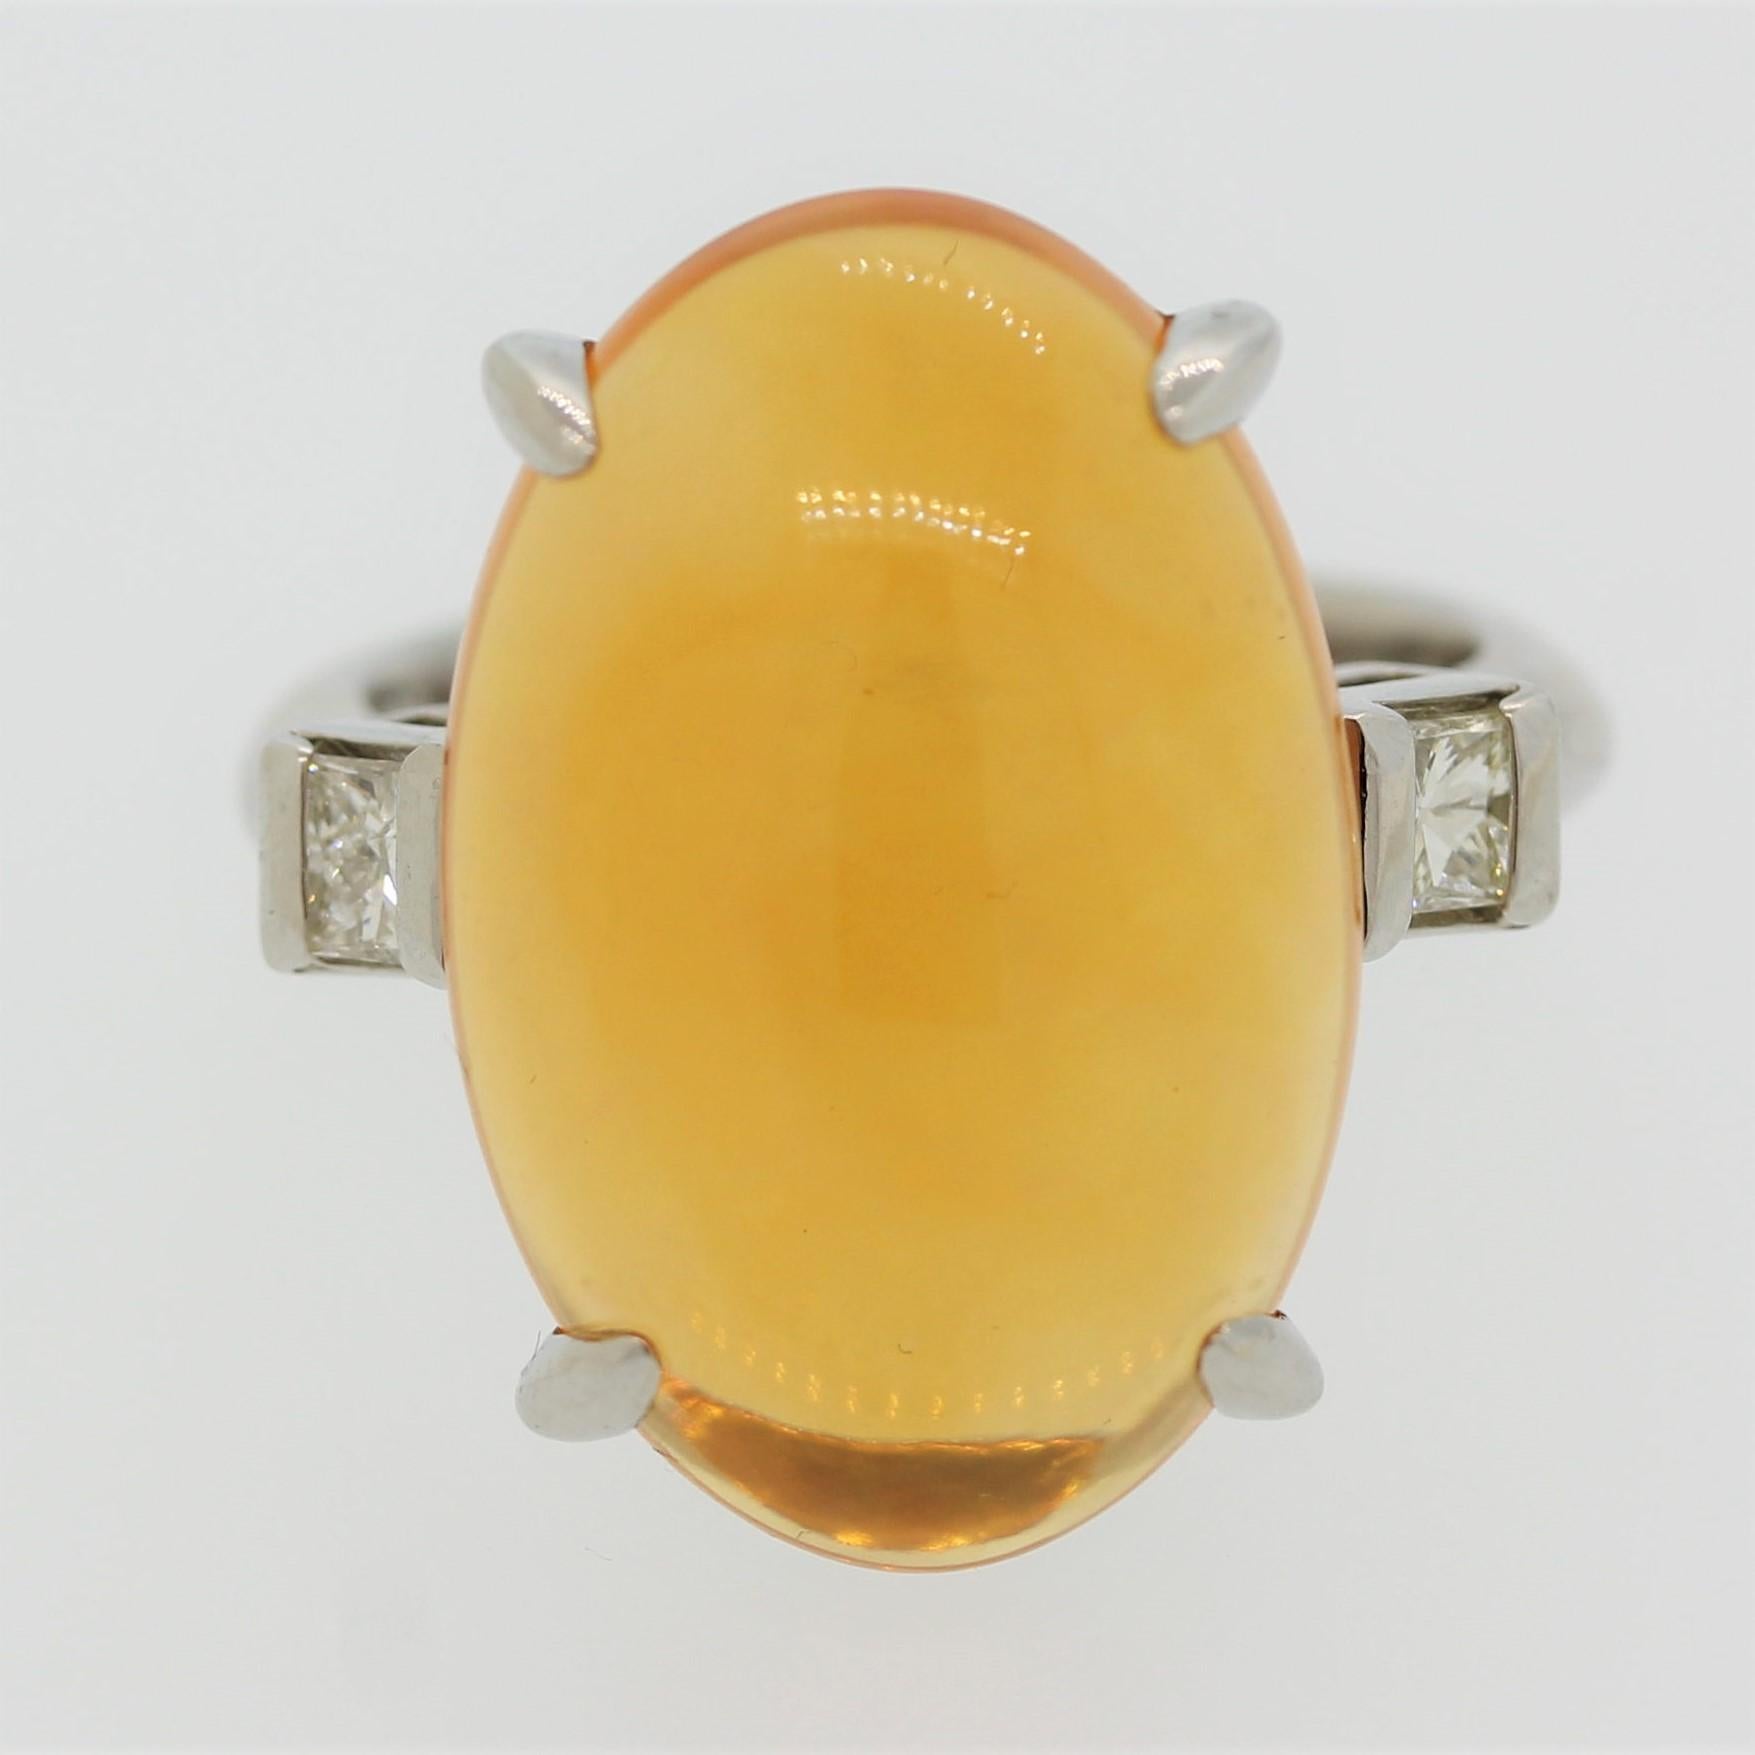 A luscious fire opal weighing 10.95 carats takes center stage. It has a vibrant orange hue with play of color, showing soft flashes of green. It is accented by 2 princess cut diamonds on its shoulders weighing a total of 0.32 carats. Hand fabricated